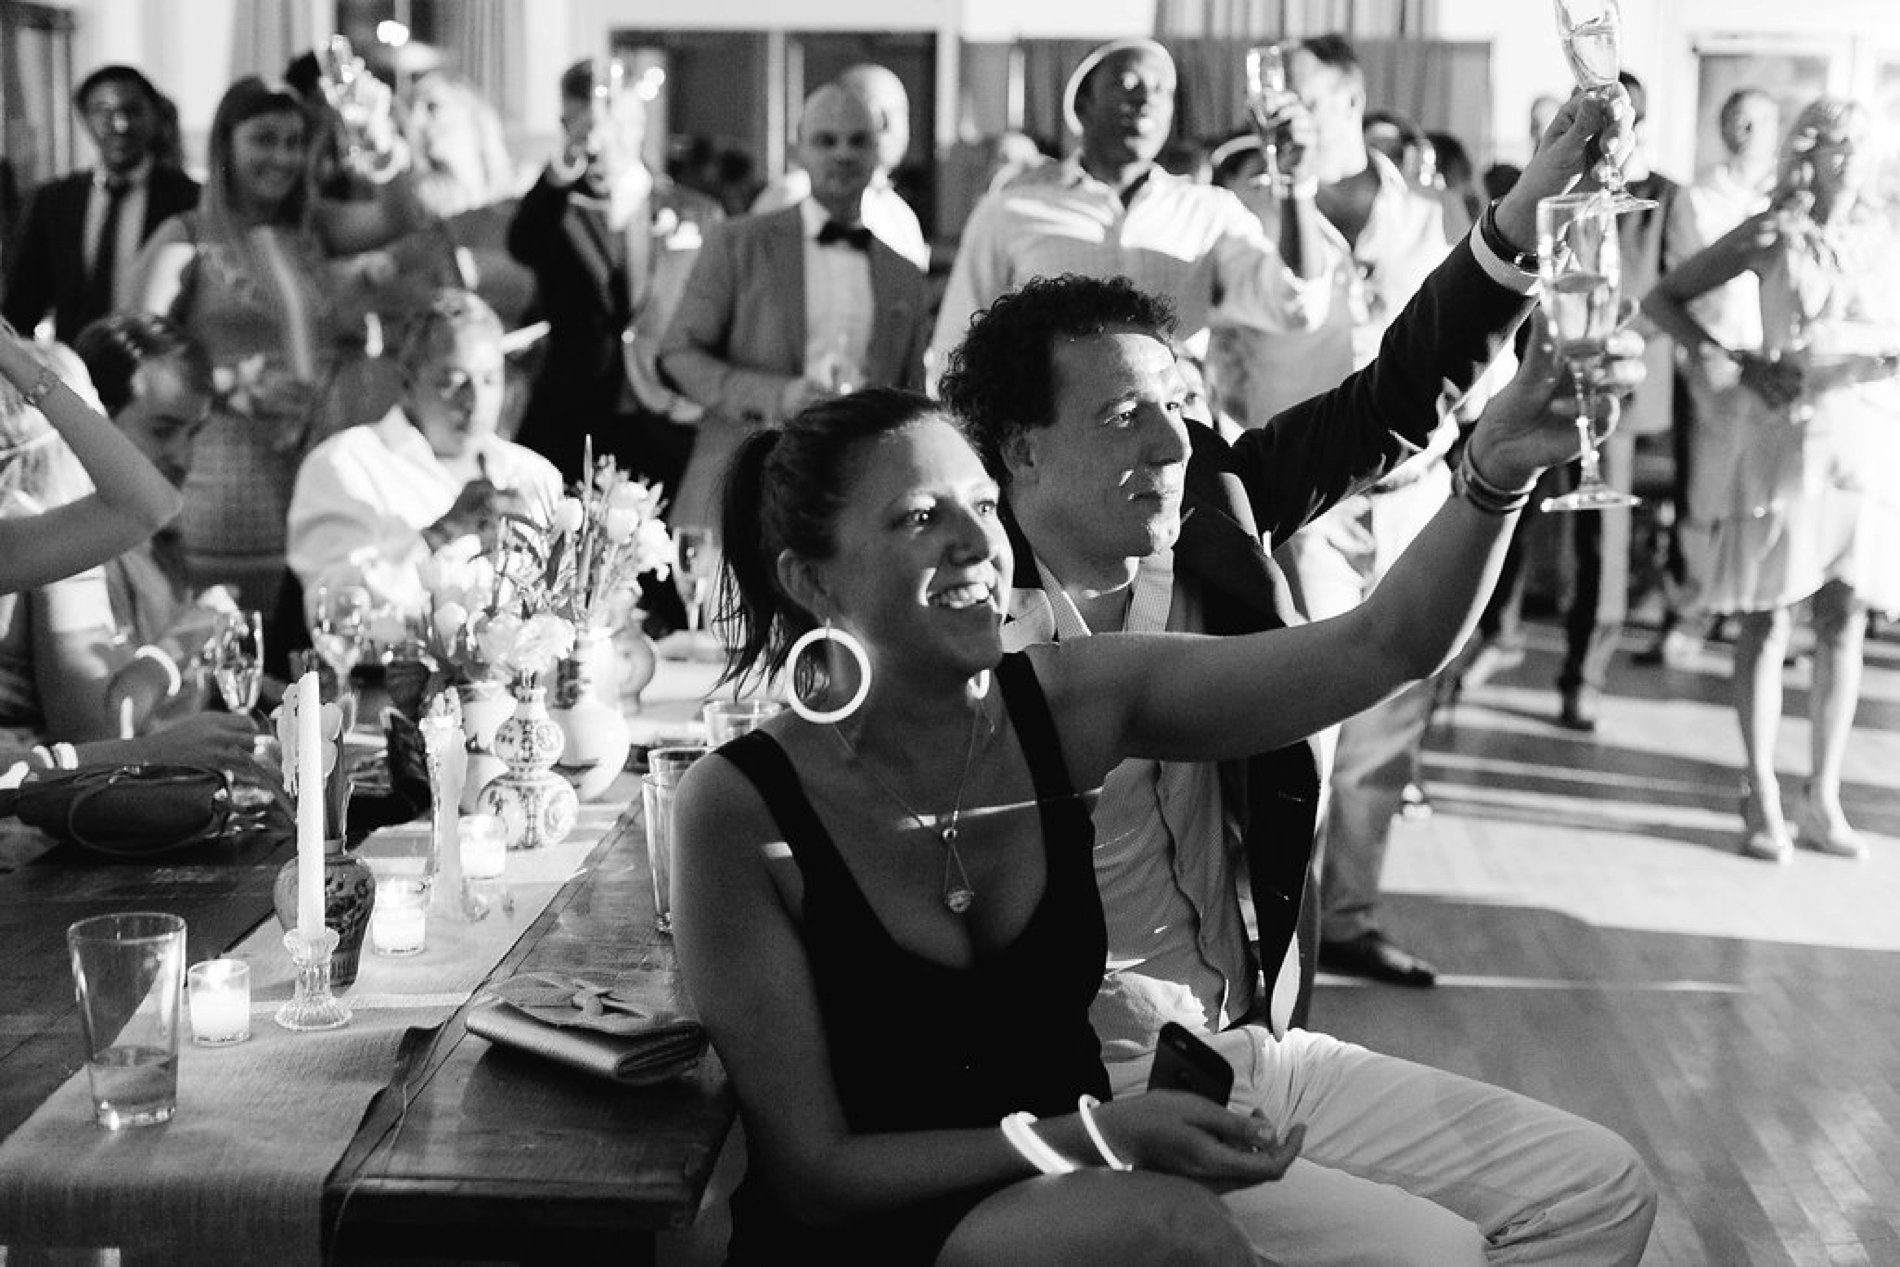 Guests cheering the bride and groom